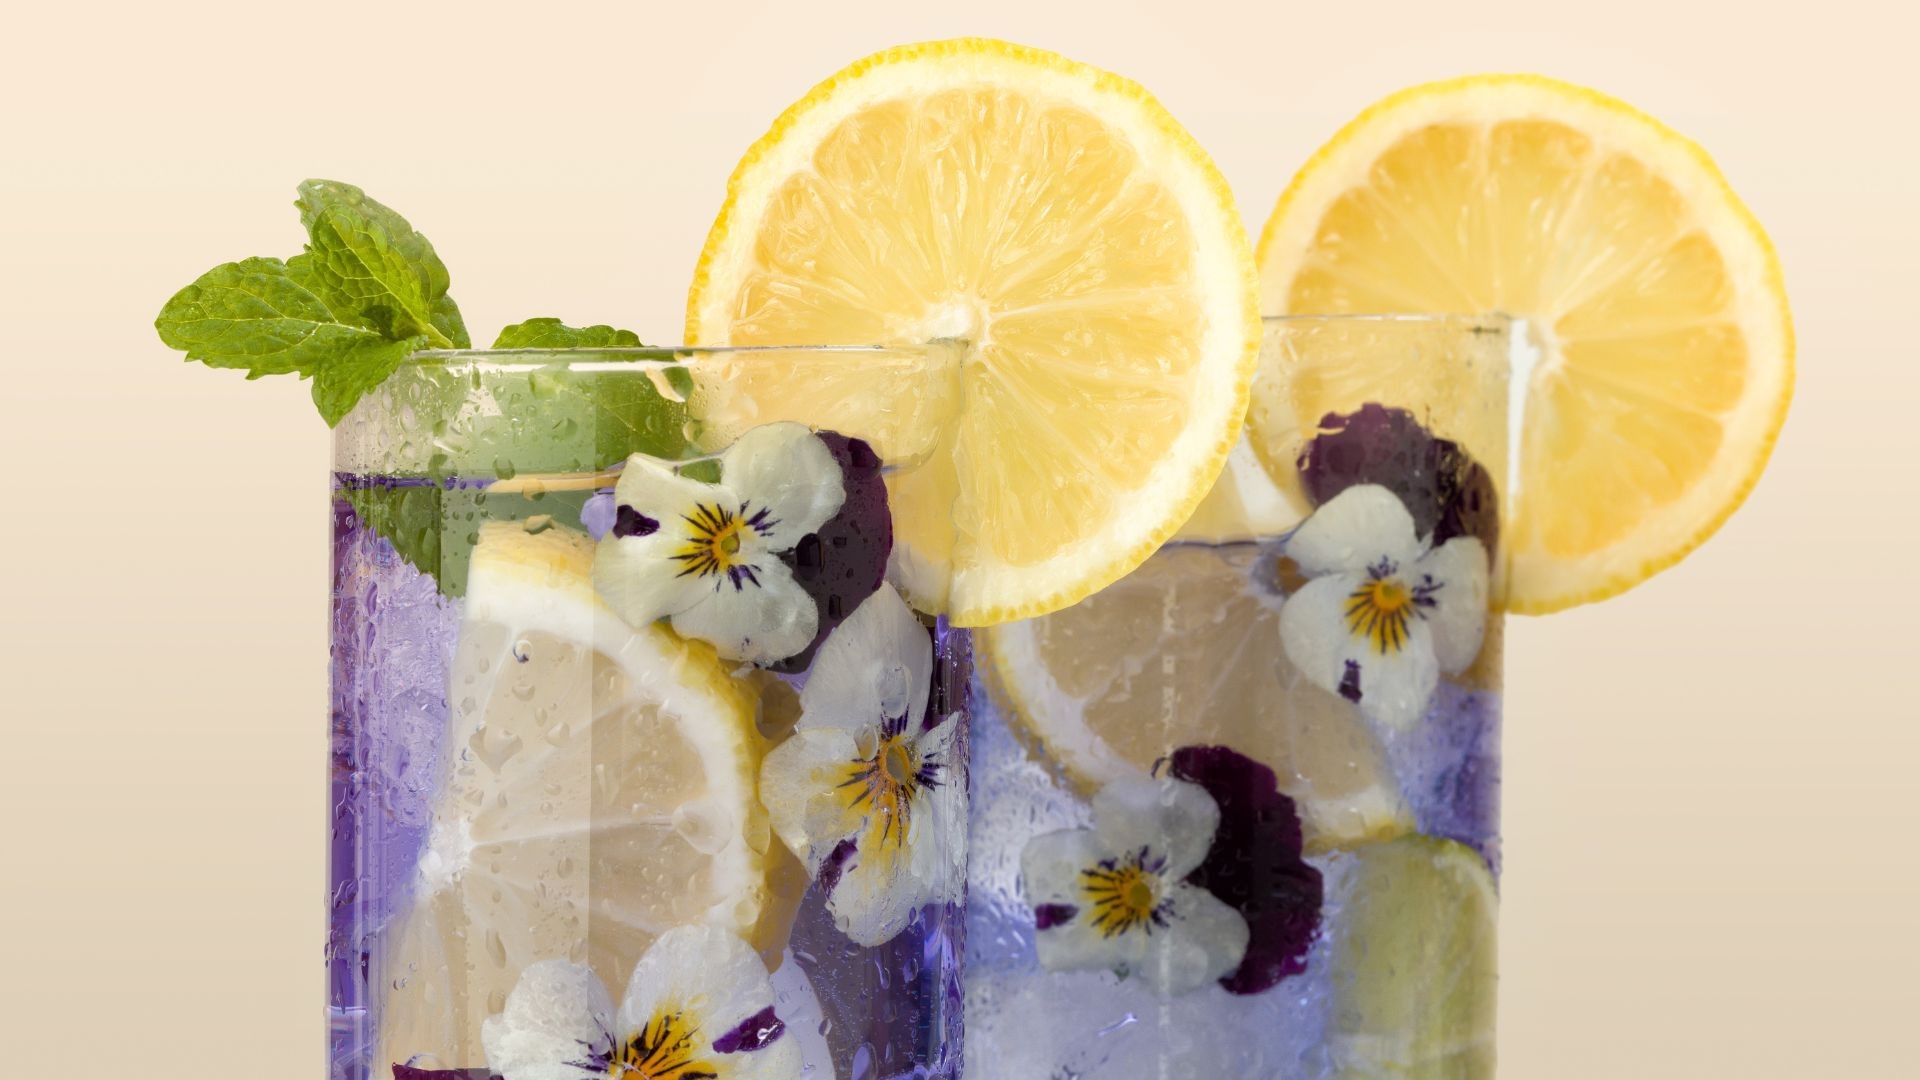 My ultimate guide to edible flowers for drinks and cooking • Leeks and High  Heels